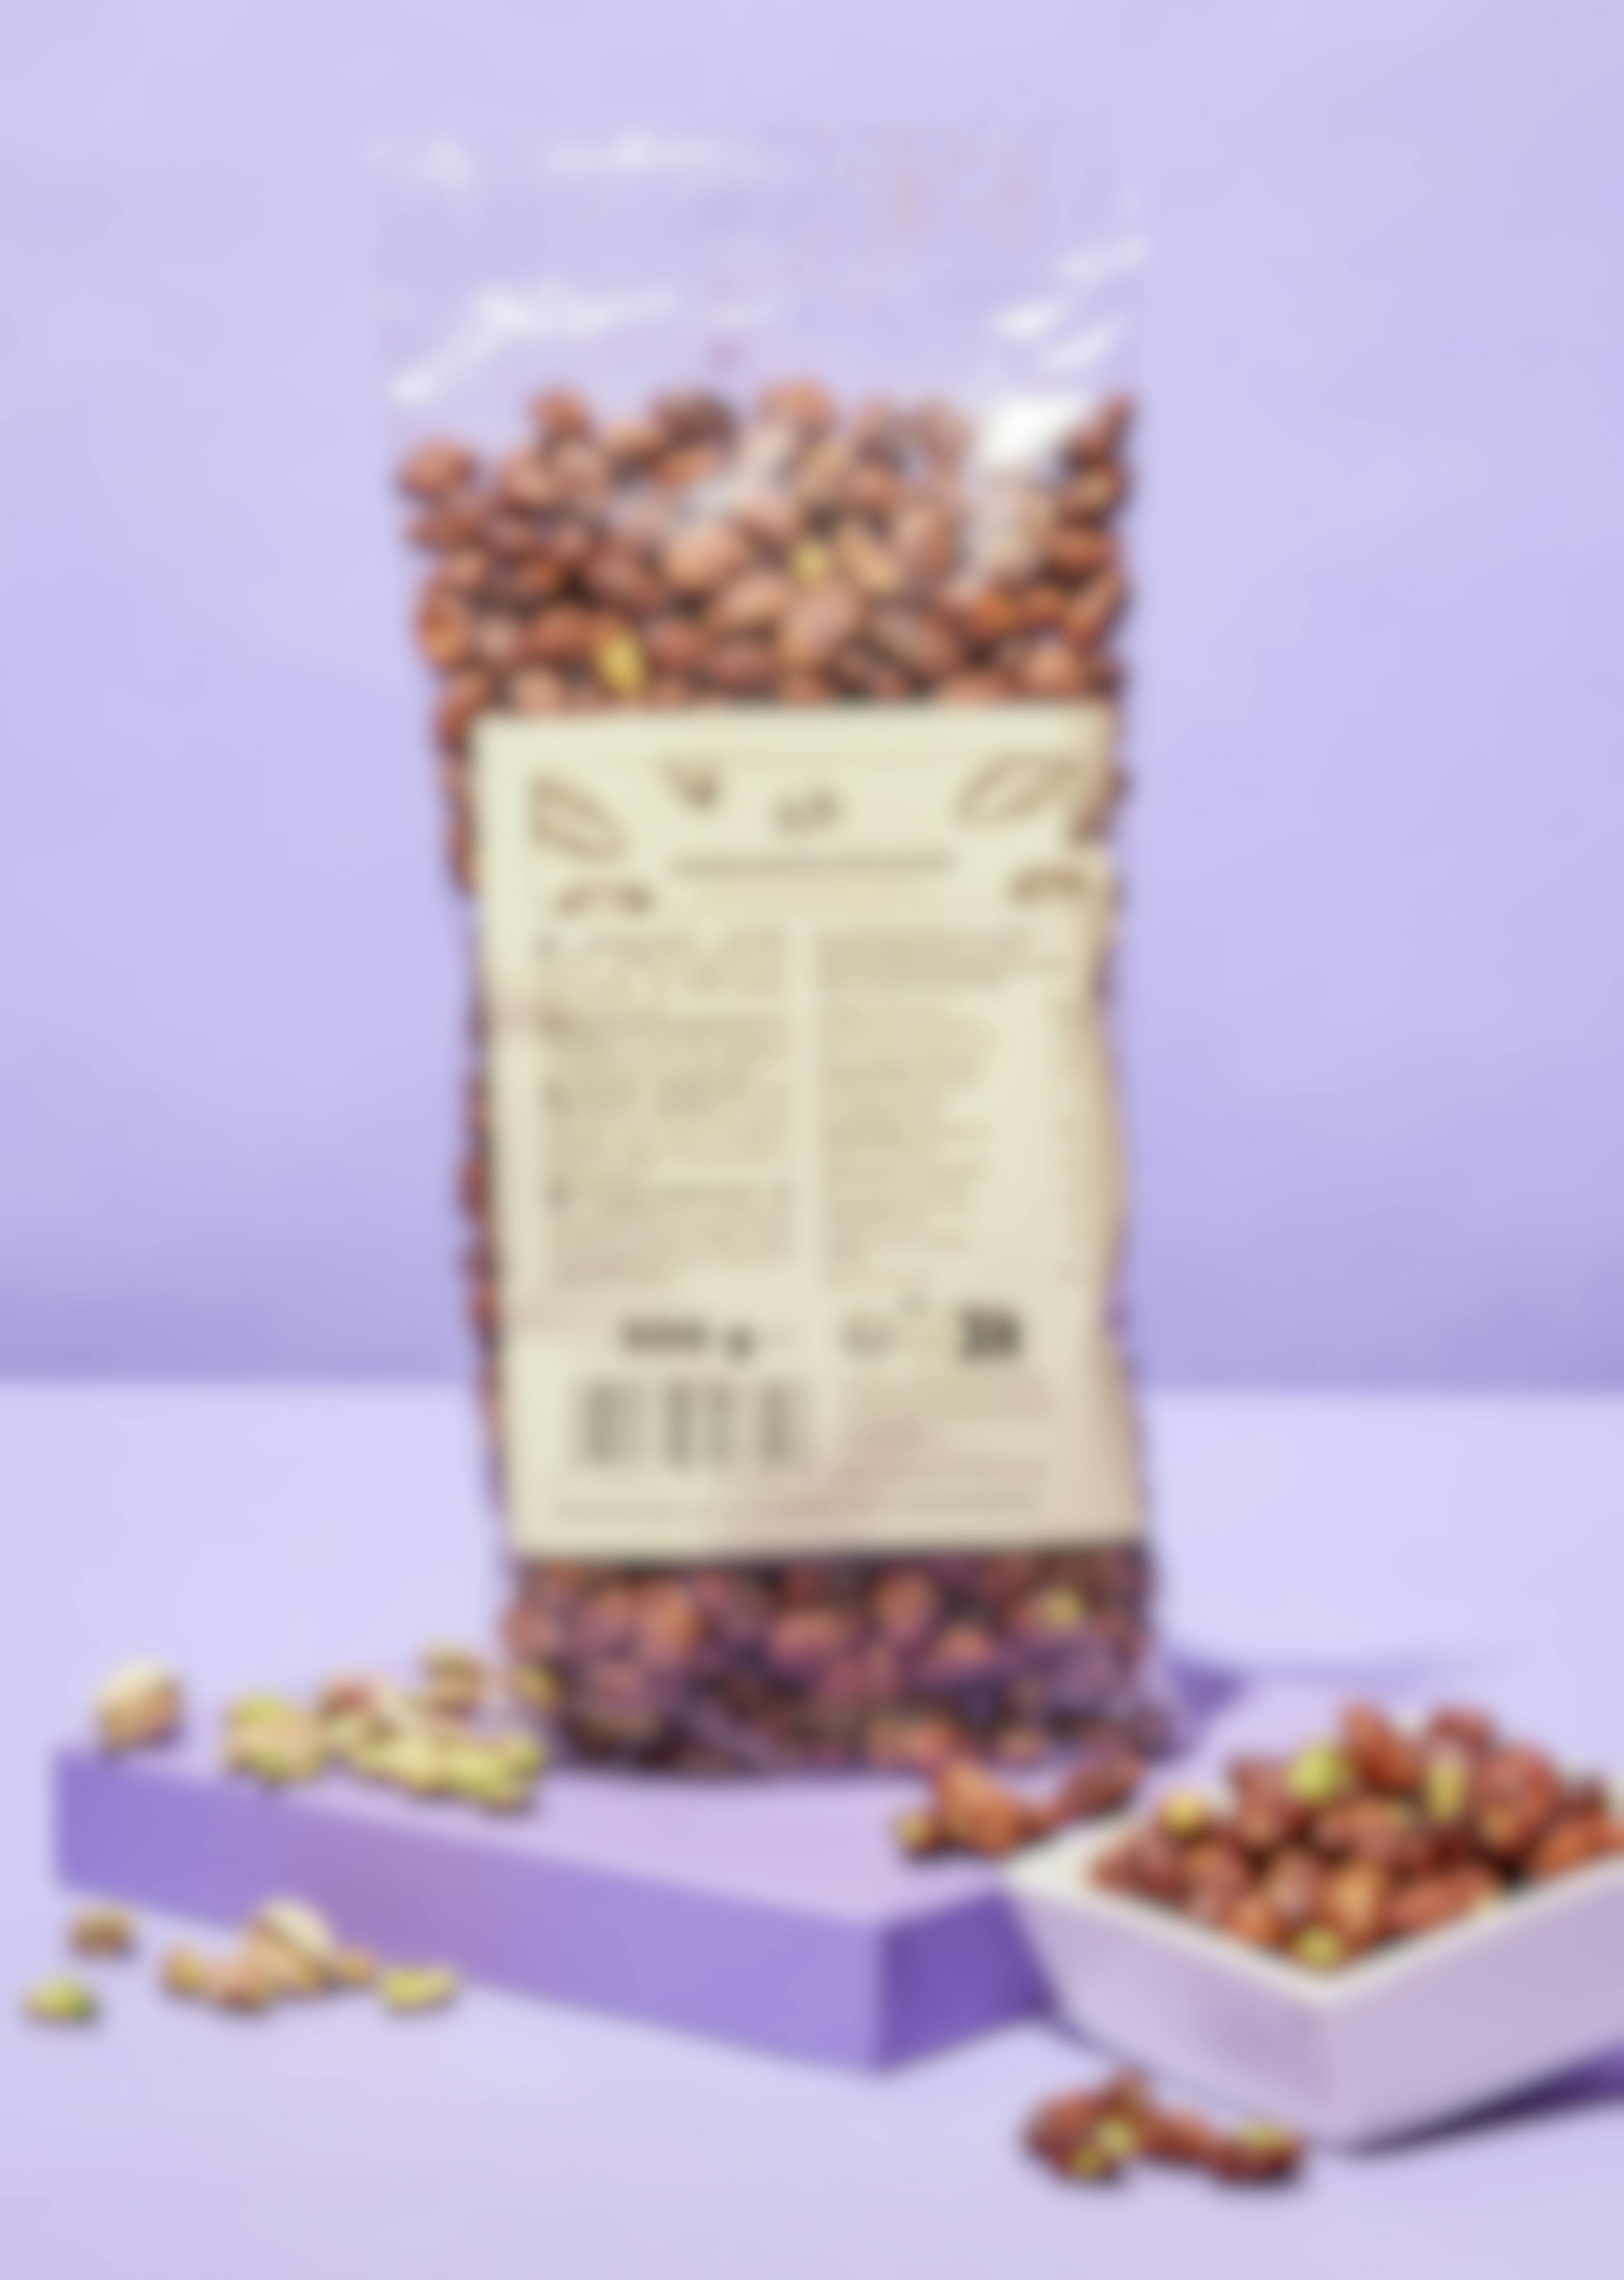 Roasted pistachios salted caramel 500g